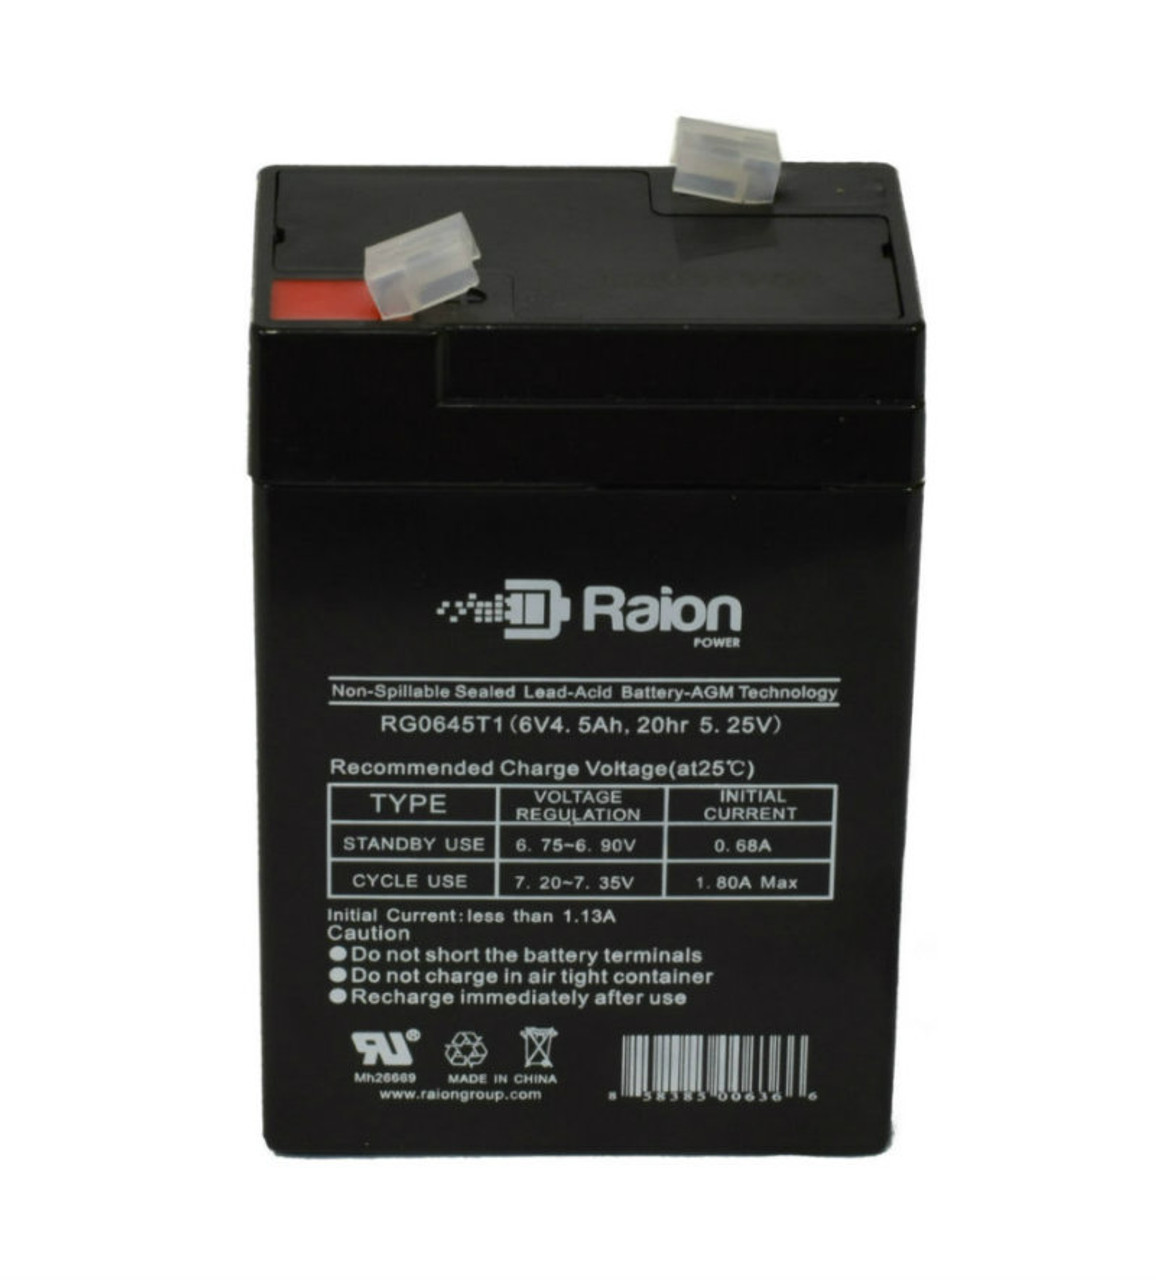 Raion Power RG0645T1 Replacement Battery Cartridge for Nellcor Pulse Oximeter N1000